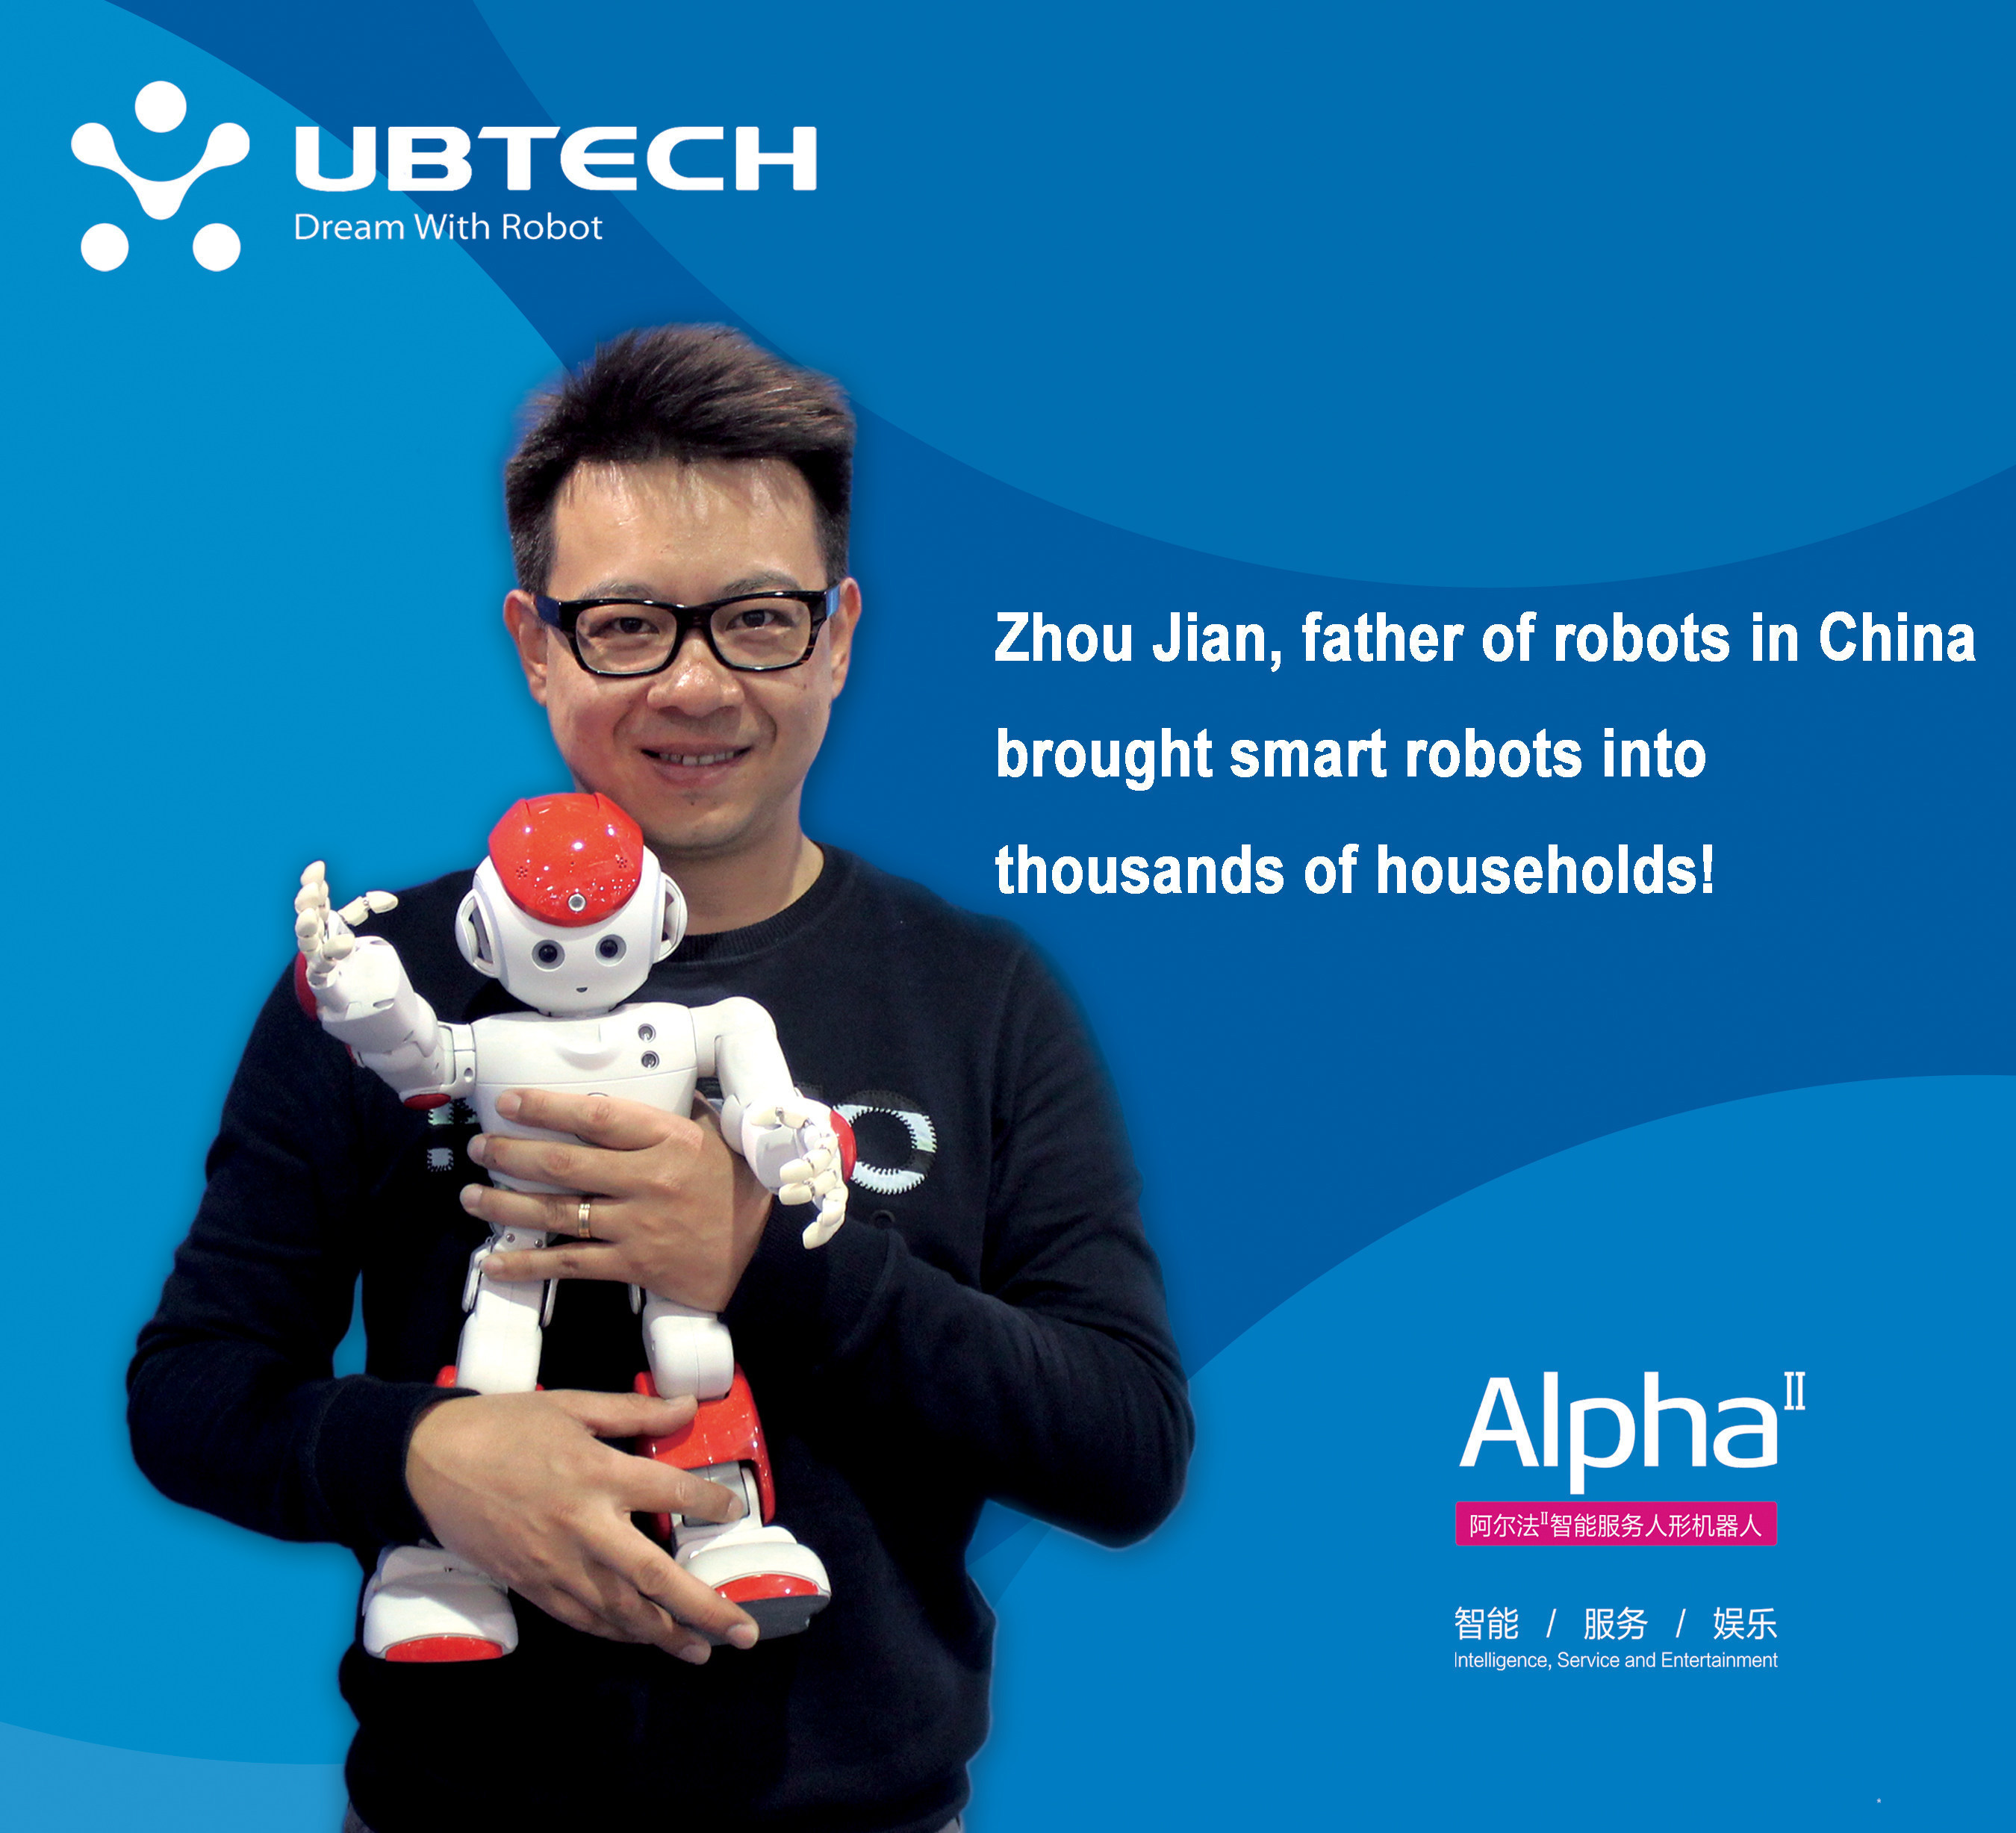 Zhou Jian, father of robots in China, brought smart robots into thousands of households